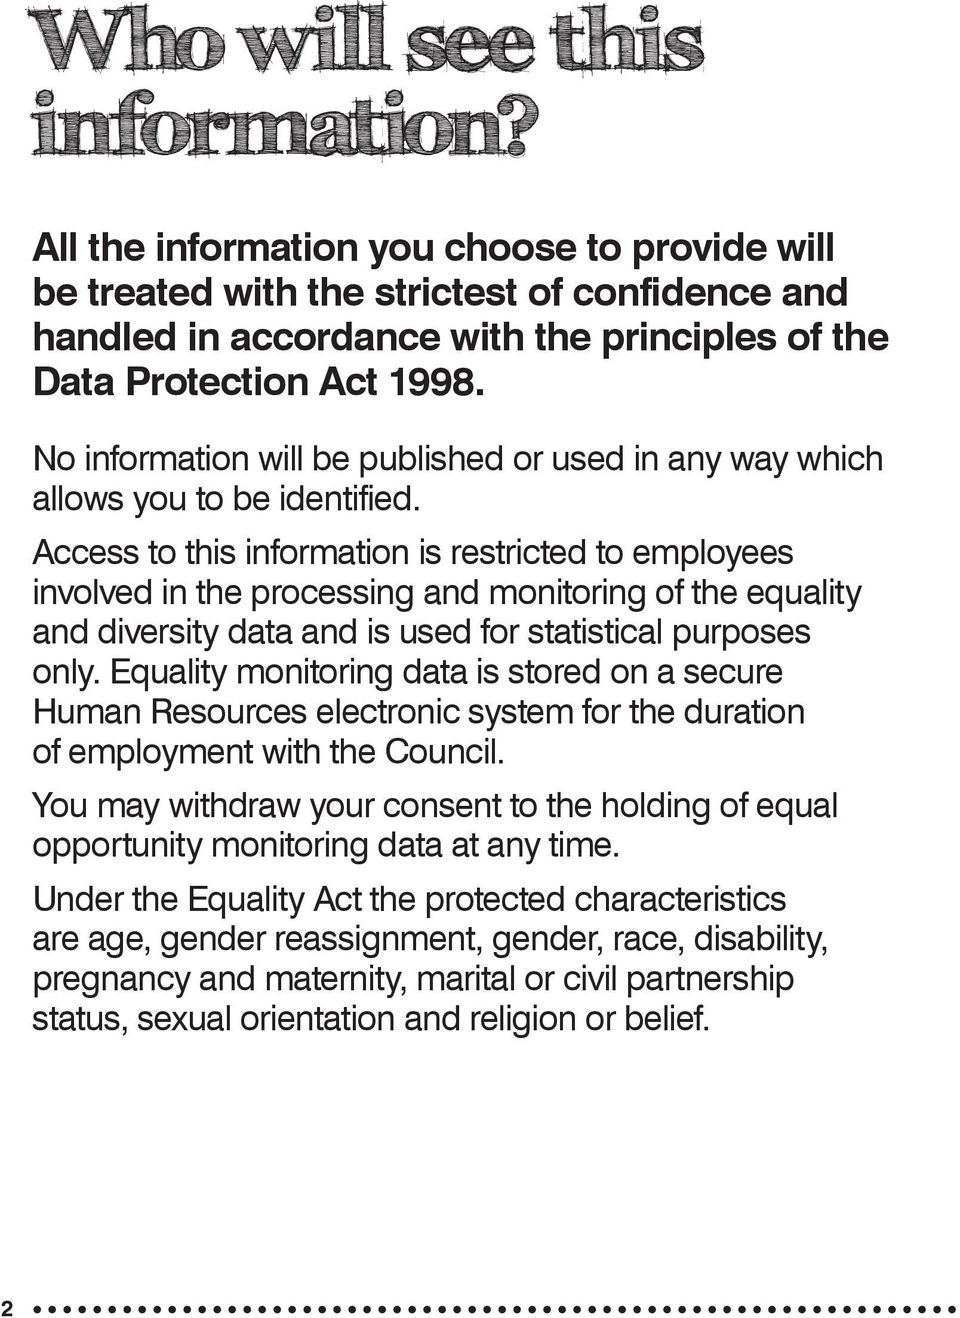 Access to this information is restricted to employees involved in the processing and monitoring of the equality and diversity data and is used for statistical purposes only.